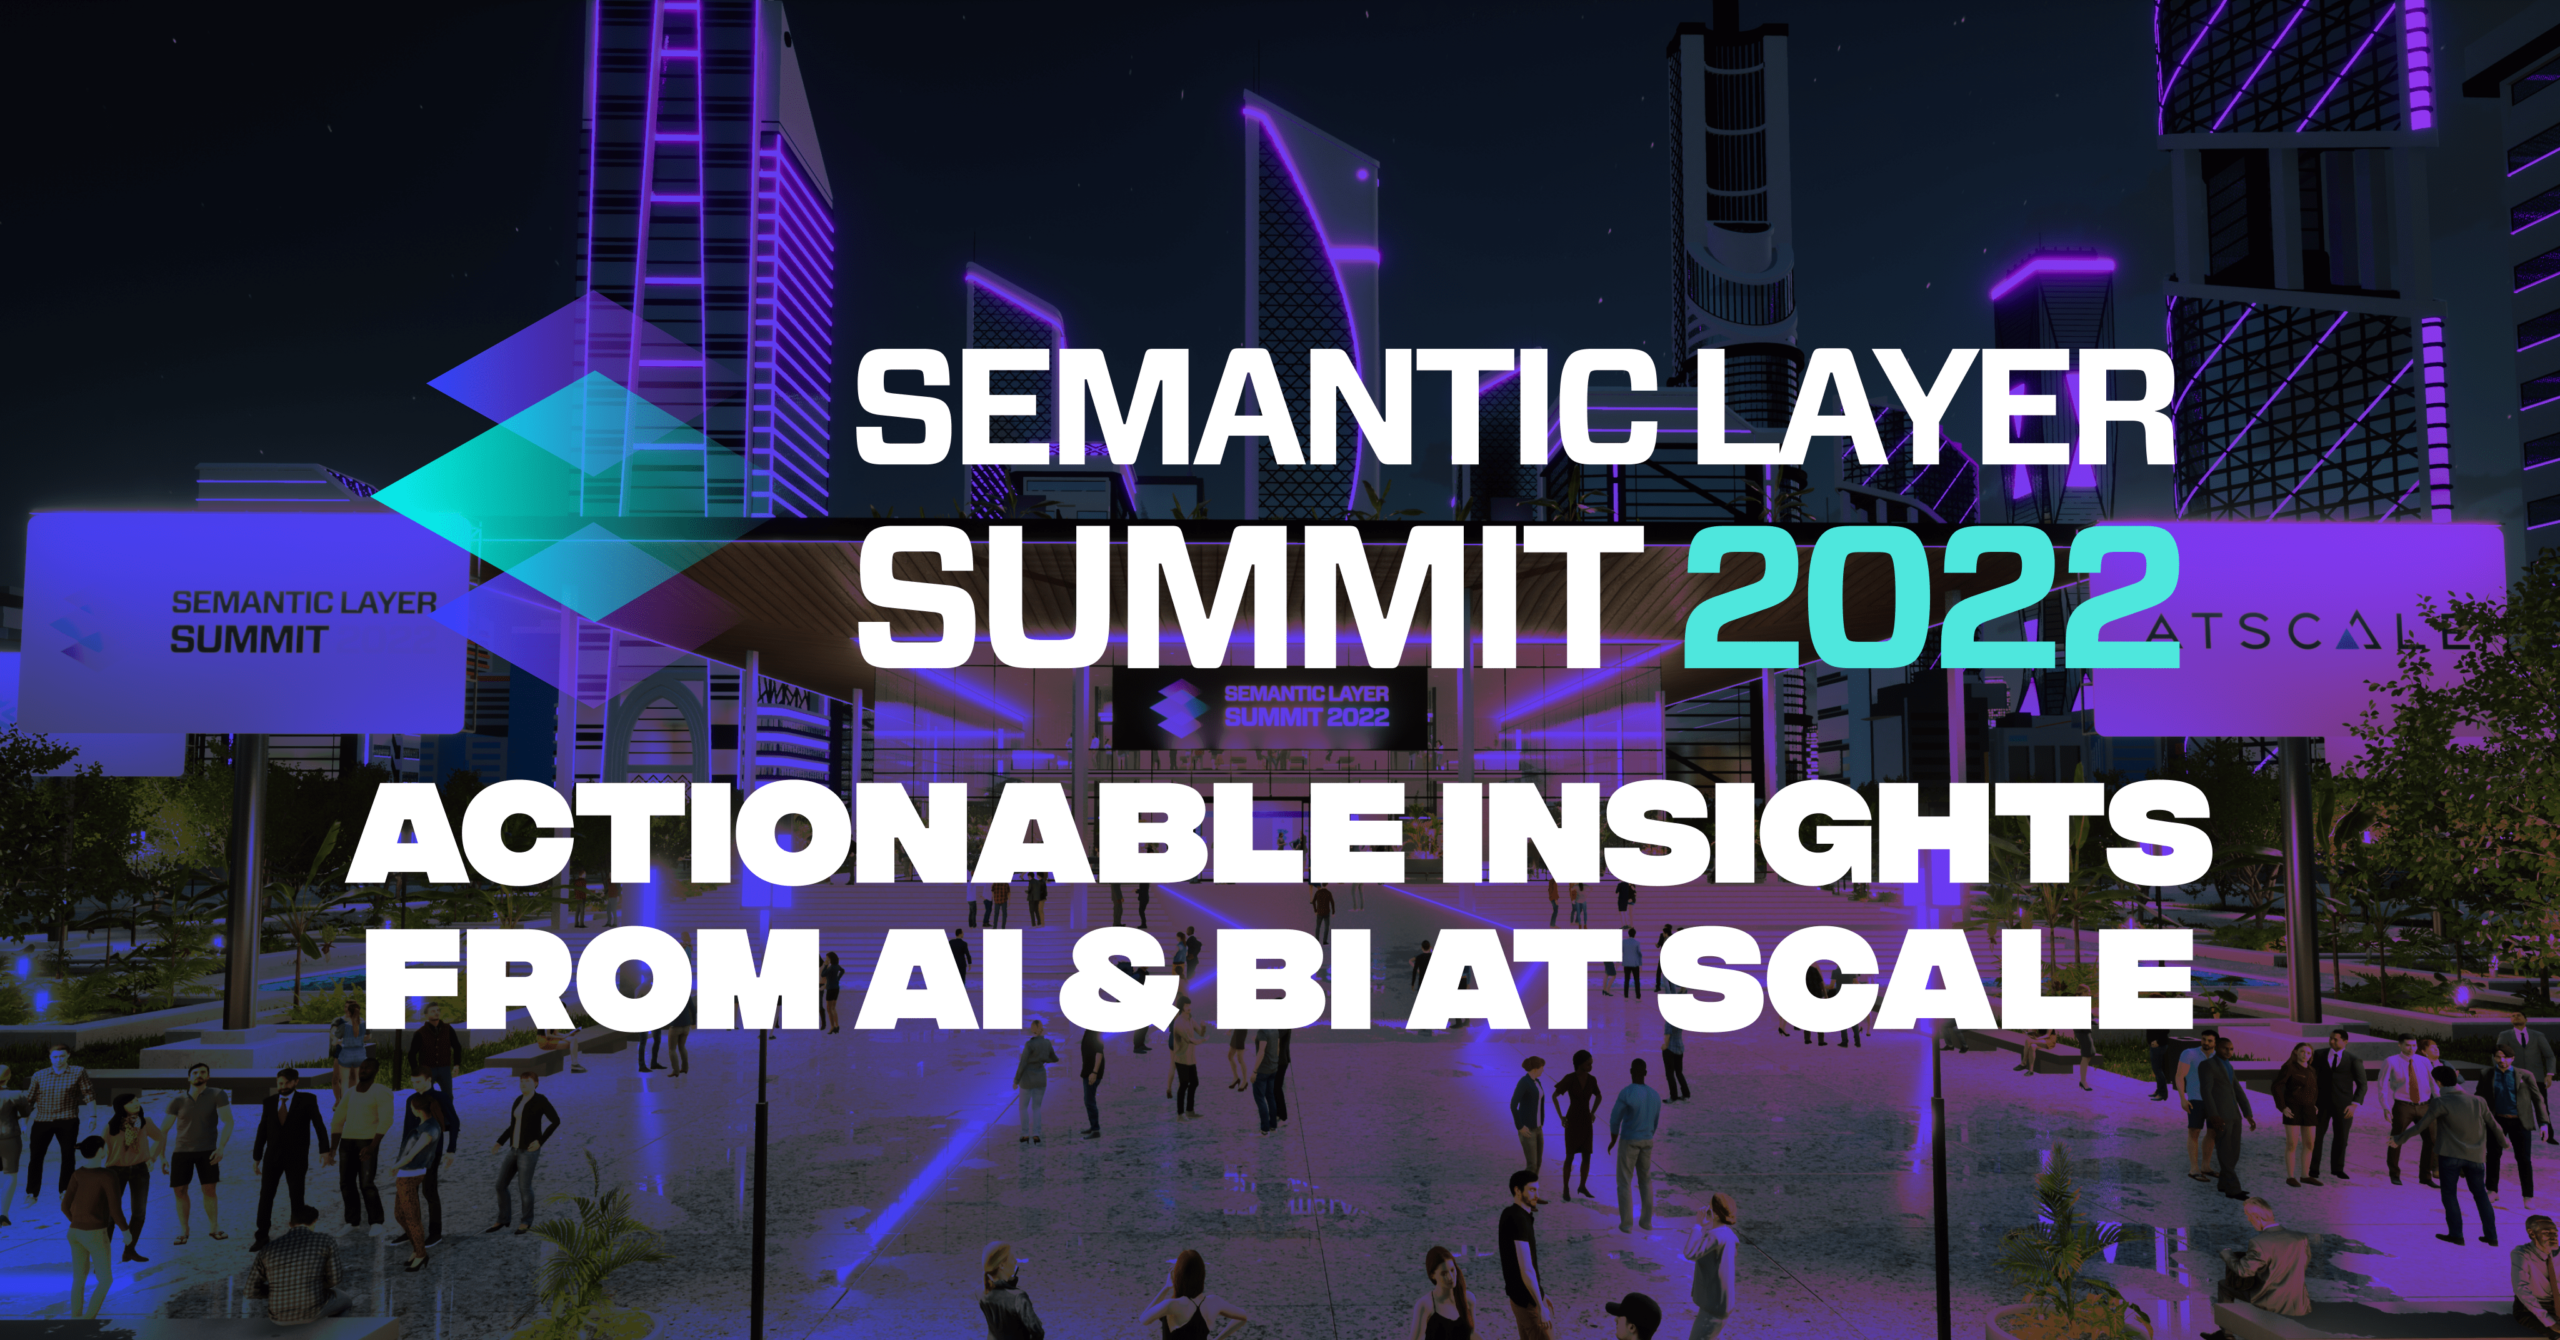 4 Key Takeaways from the Semantic Layer Summit